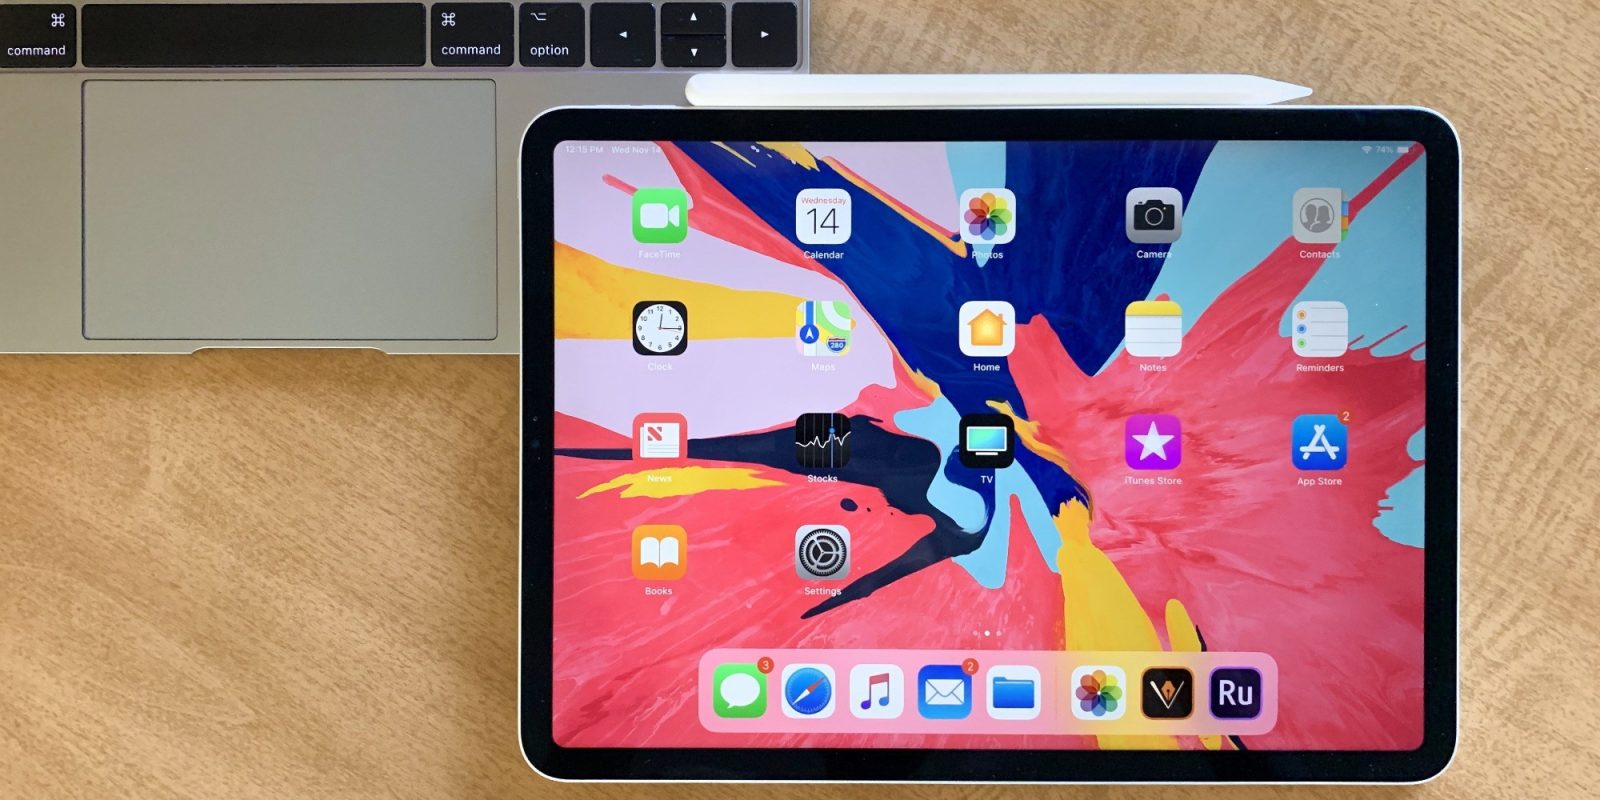 Amazon Clears Out 2018 Ipad Pro Inventory With Up To 350 Off